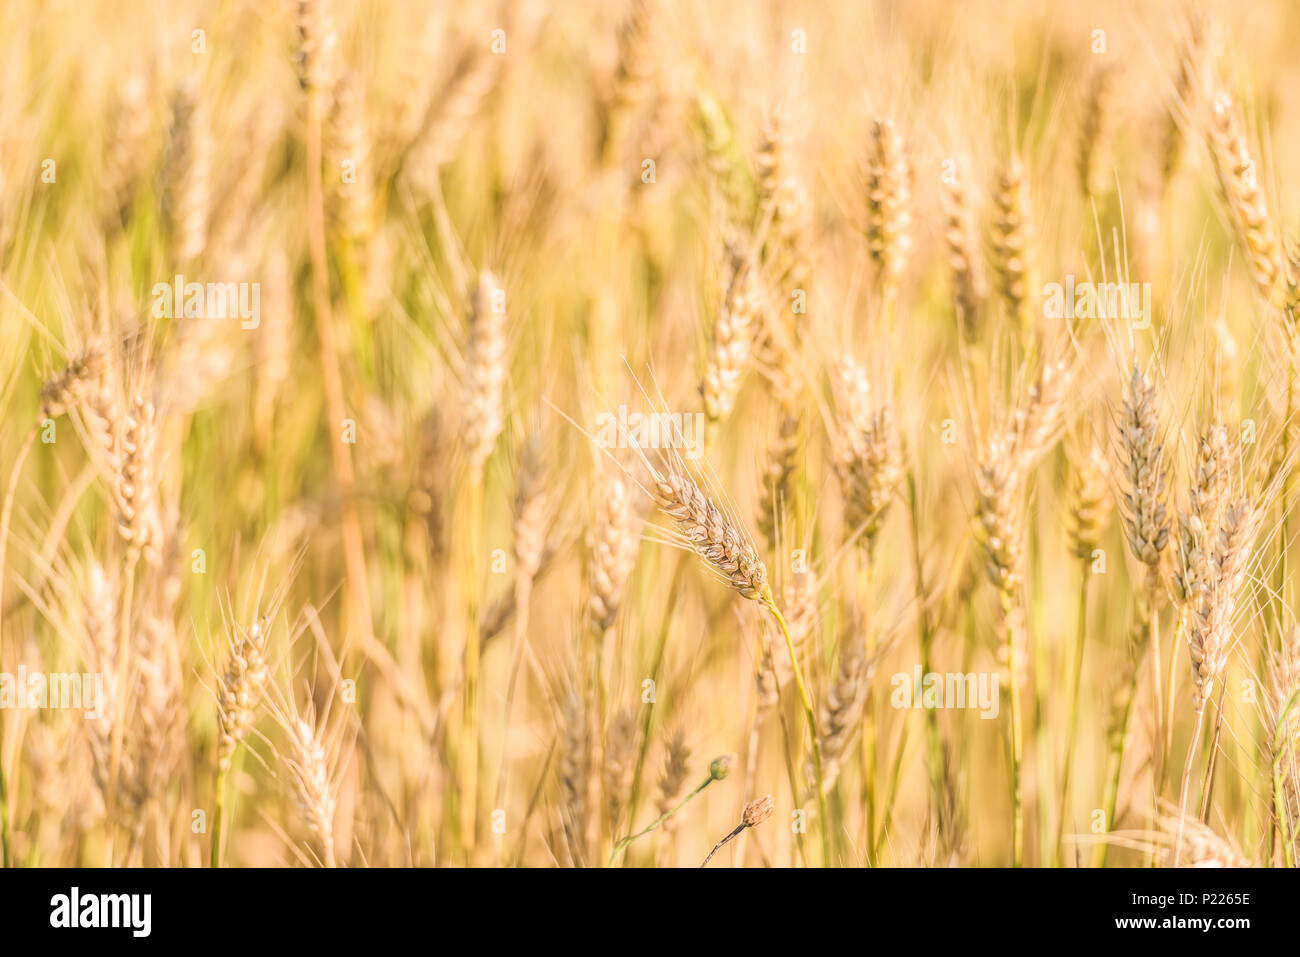 Beautiful nature sunrise landscape. Summer background of ripening ears of agriculture landscape. Wheat field natural product. Stock Photo